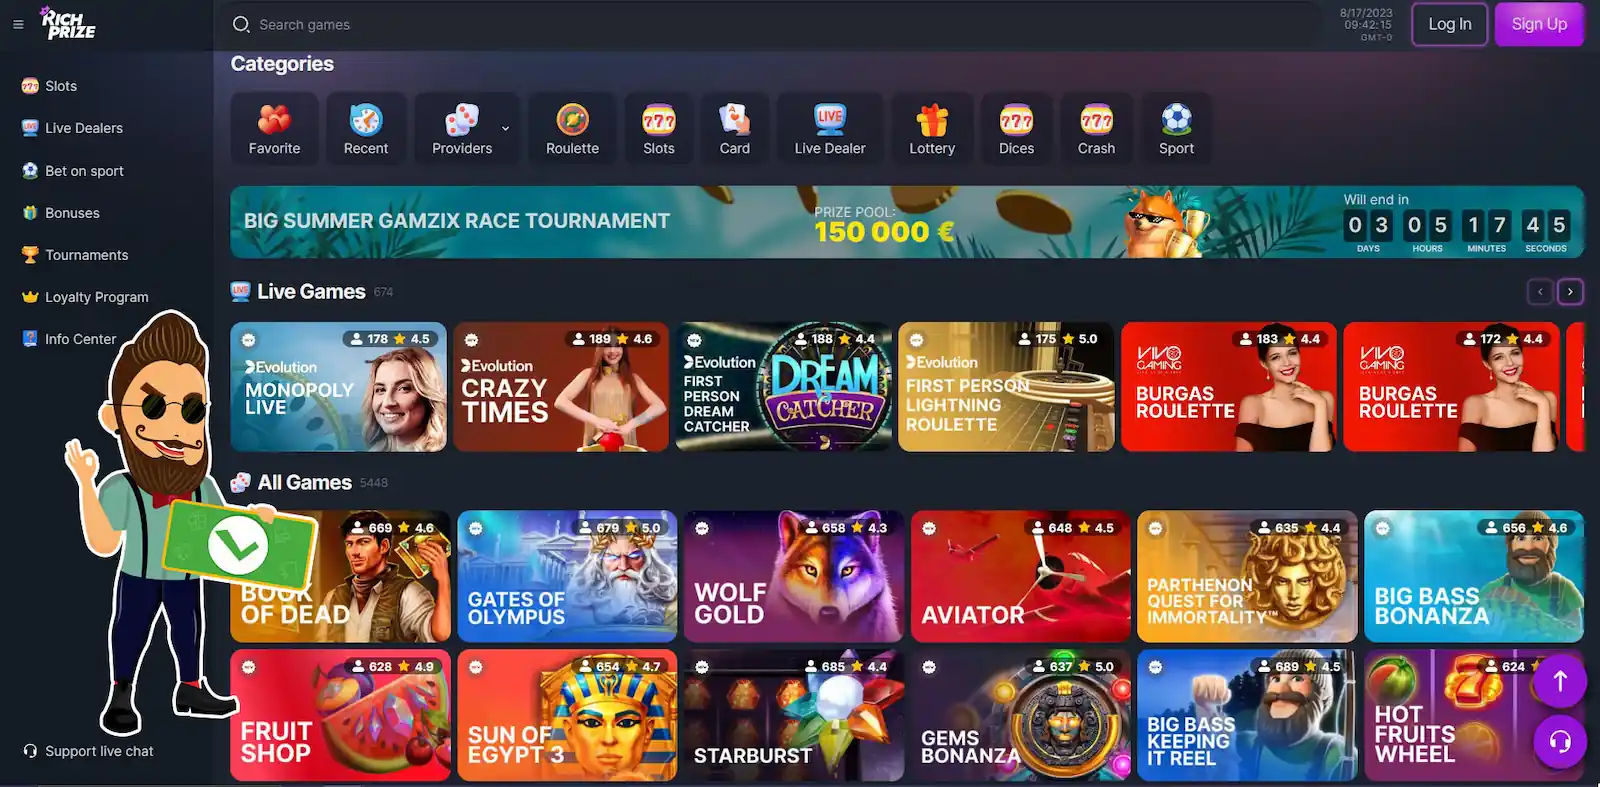 Games Available At Rich Prize Casino